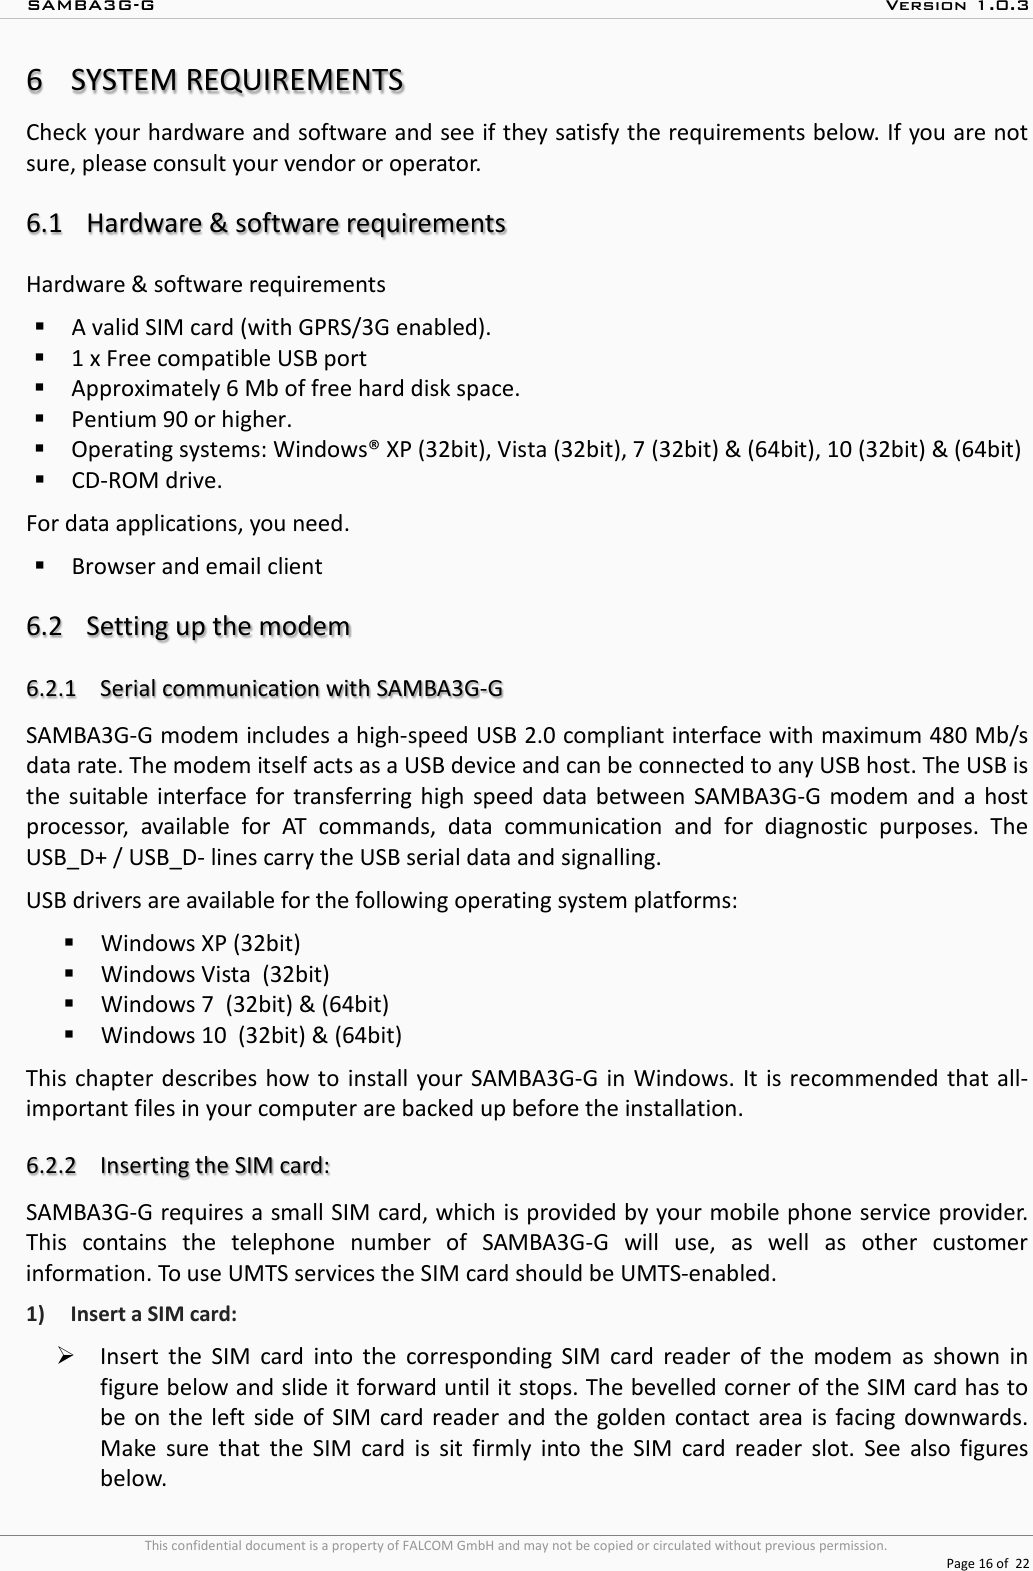 SAMBA3G-G  Version 1.0.3   This confidential document is a property of FALCOM GmbH and may not be copied or circulated without previous permission.  Page 16 of  22  6SYSTEM REQUIREMENTS Check your hardware and software and see if they satisfy the requirements below. If you are not sure, please consult your vendor or operator.  6.1 Hardware &amp; software requirements Hardware &amp; software requirements  A valid SIM card (with GPRS/3G enabled).  1 x Free compatible USB port  Approximately 6 Mb of free hard disk space.  Pentium 90 or higher.  Operating systems: Windows® XP (32bit), Vista (32bit), 7 (32bit) &amp; (64bit), 10 (32bit) &amp; (64bit)  CD-ROM drive. For data applications, you need.  Browser and email client   6.2 Setting up the modem  6.2.1 Serial communication with SAMBA3G-G  SAMBA3G-G modem includes a high-speed USB 2.0 compliant interface with maximum 480 Mb/s data rate. The modem itself acts as a USB device and can be connected to any USB host. The USB is the suitable interface for transferring high speed data between SAMBA3G-G modem and a host processor, available for AT commands, data communication and for diagnostic purposes. The USB_D+ / USB_D- lines carry the USB serial data and signalling. USB drivers are available for the following operating system platforms:   Windows XP (32bit)  Windows Vista  (32bit)  Windows 7  (32bit) &amp; (64bit)  Windows 10  (32bit) &amp; (64bit) This chapter describes how to install your SAMBA3G-G in Windows. It is recommended that all-important files in your computer are backed up before the installation.  6.2.2 Inserting the SIM card: SAMBA3G-G requires a small SIM card, which is provided by your mobile phone service provider. This contains the telephone number of SAMBA3G-G  will use, as well as other customer information. To use UMTS services the SIM card should be UMTS-enabled. 1) Insert a SIM card:  Insert the SIM card into the corresponding SIM card reader of the modem as shown in figure below and slide it forward until it stops. The bevelled corner of the SIM card has to be on the left side of SIM card reader and the golden contact area is facing downwards. Make sure that the SIM card is sit firmly into the SIM card reader slot. See also figures below. 